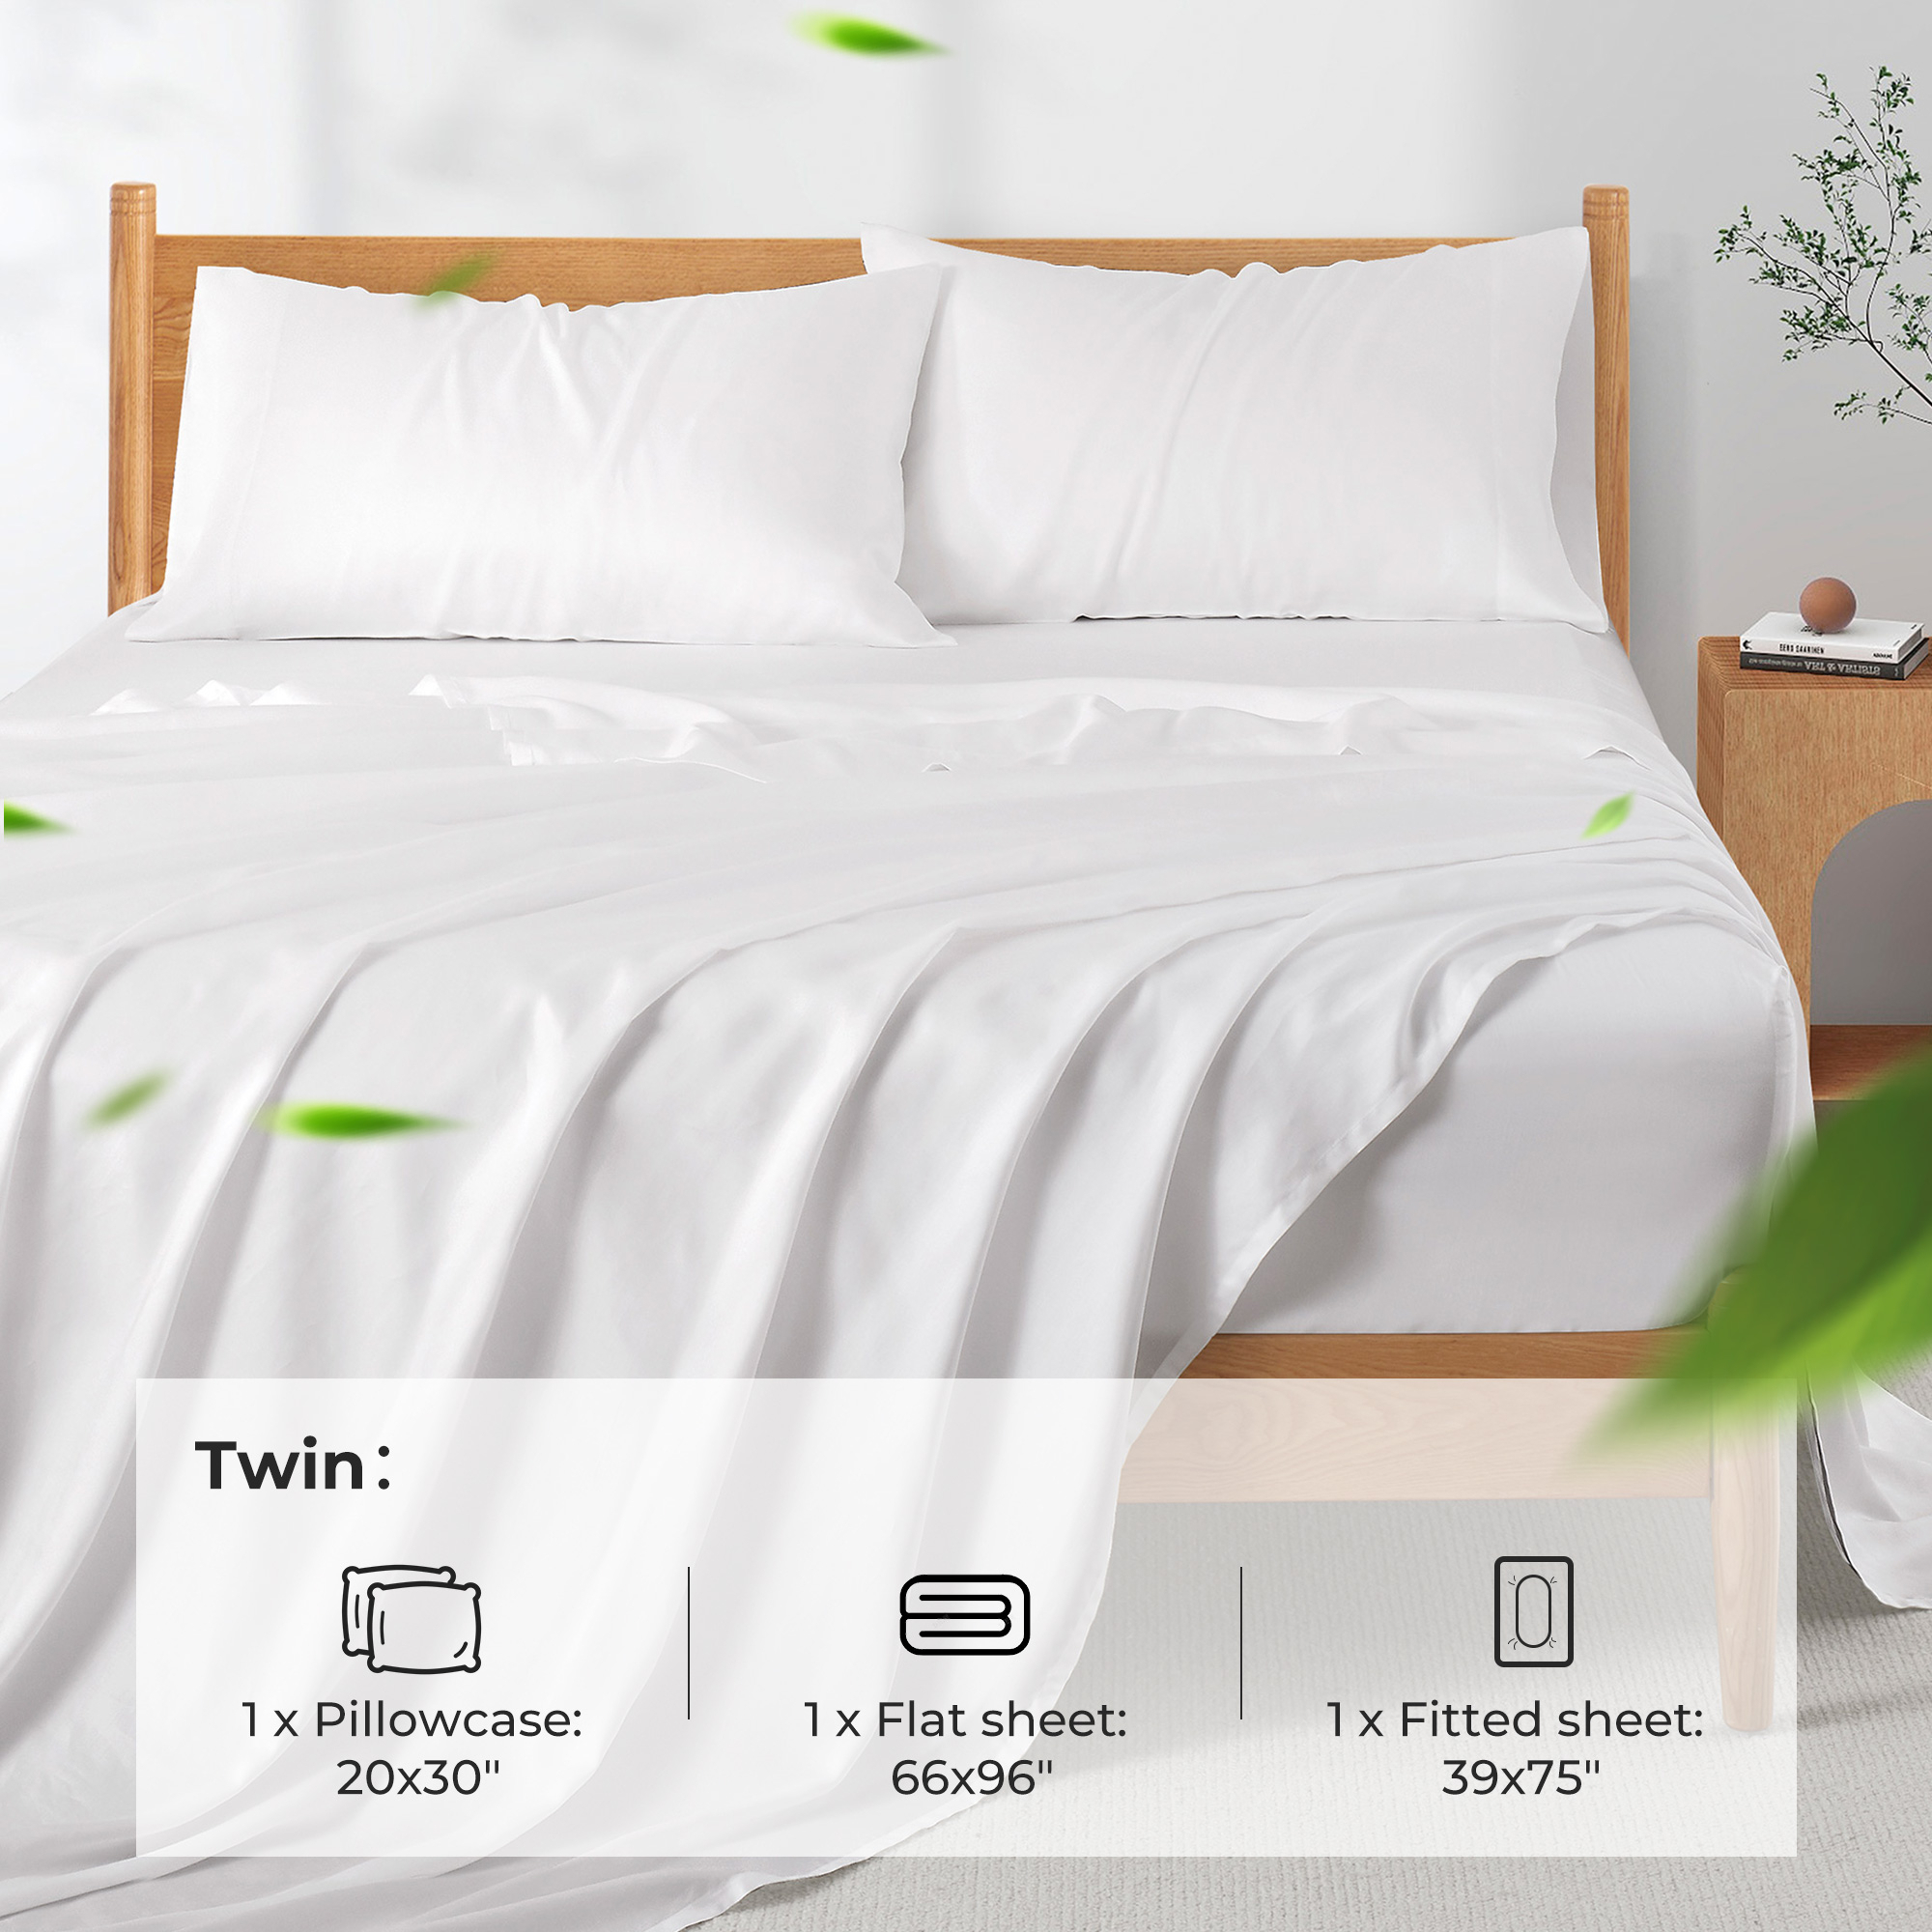 Tencel Lyocell 4Pc Sheets Set, Softest & Cooling-Deep Pocket Bottom Bed Sheet, Large Top Sheet & Pillowcases - Queen Size